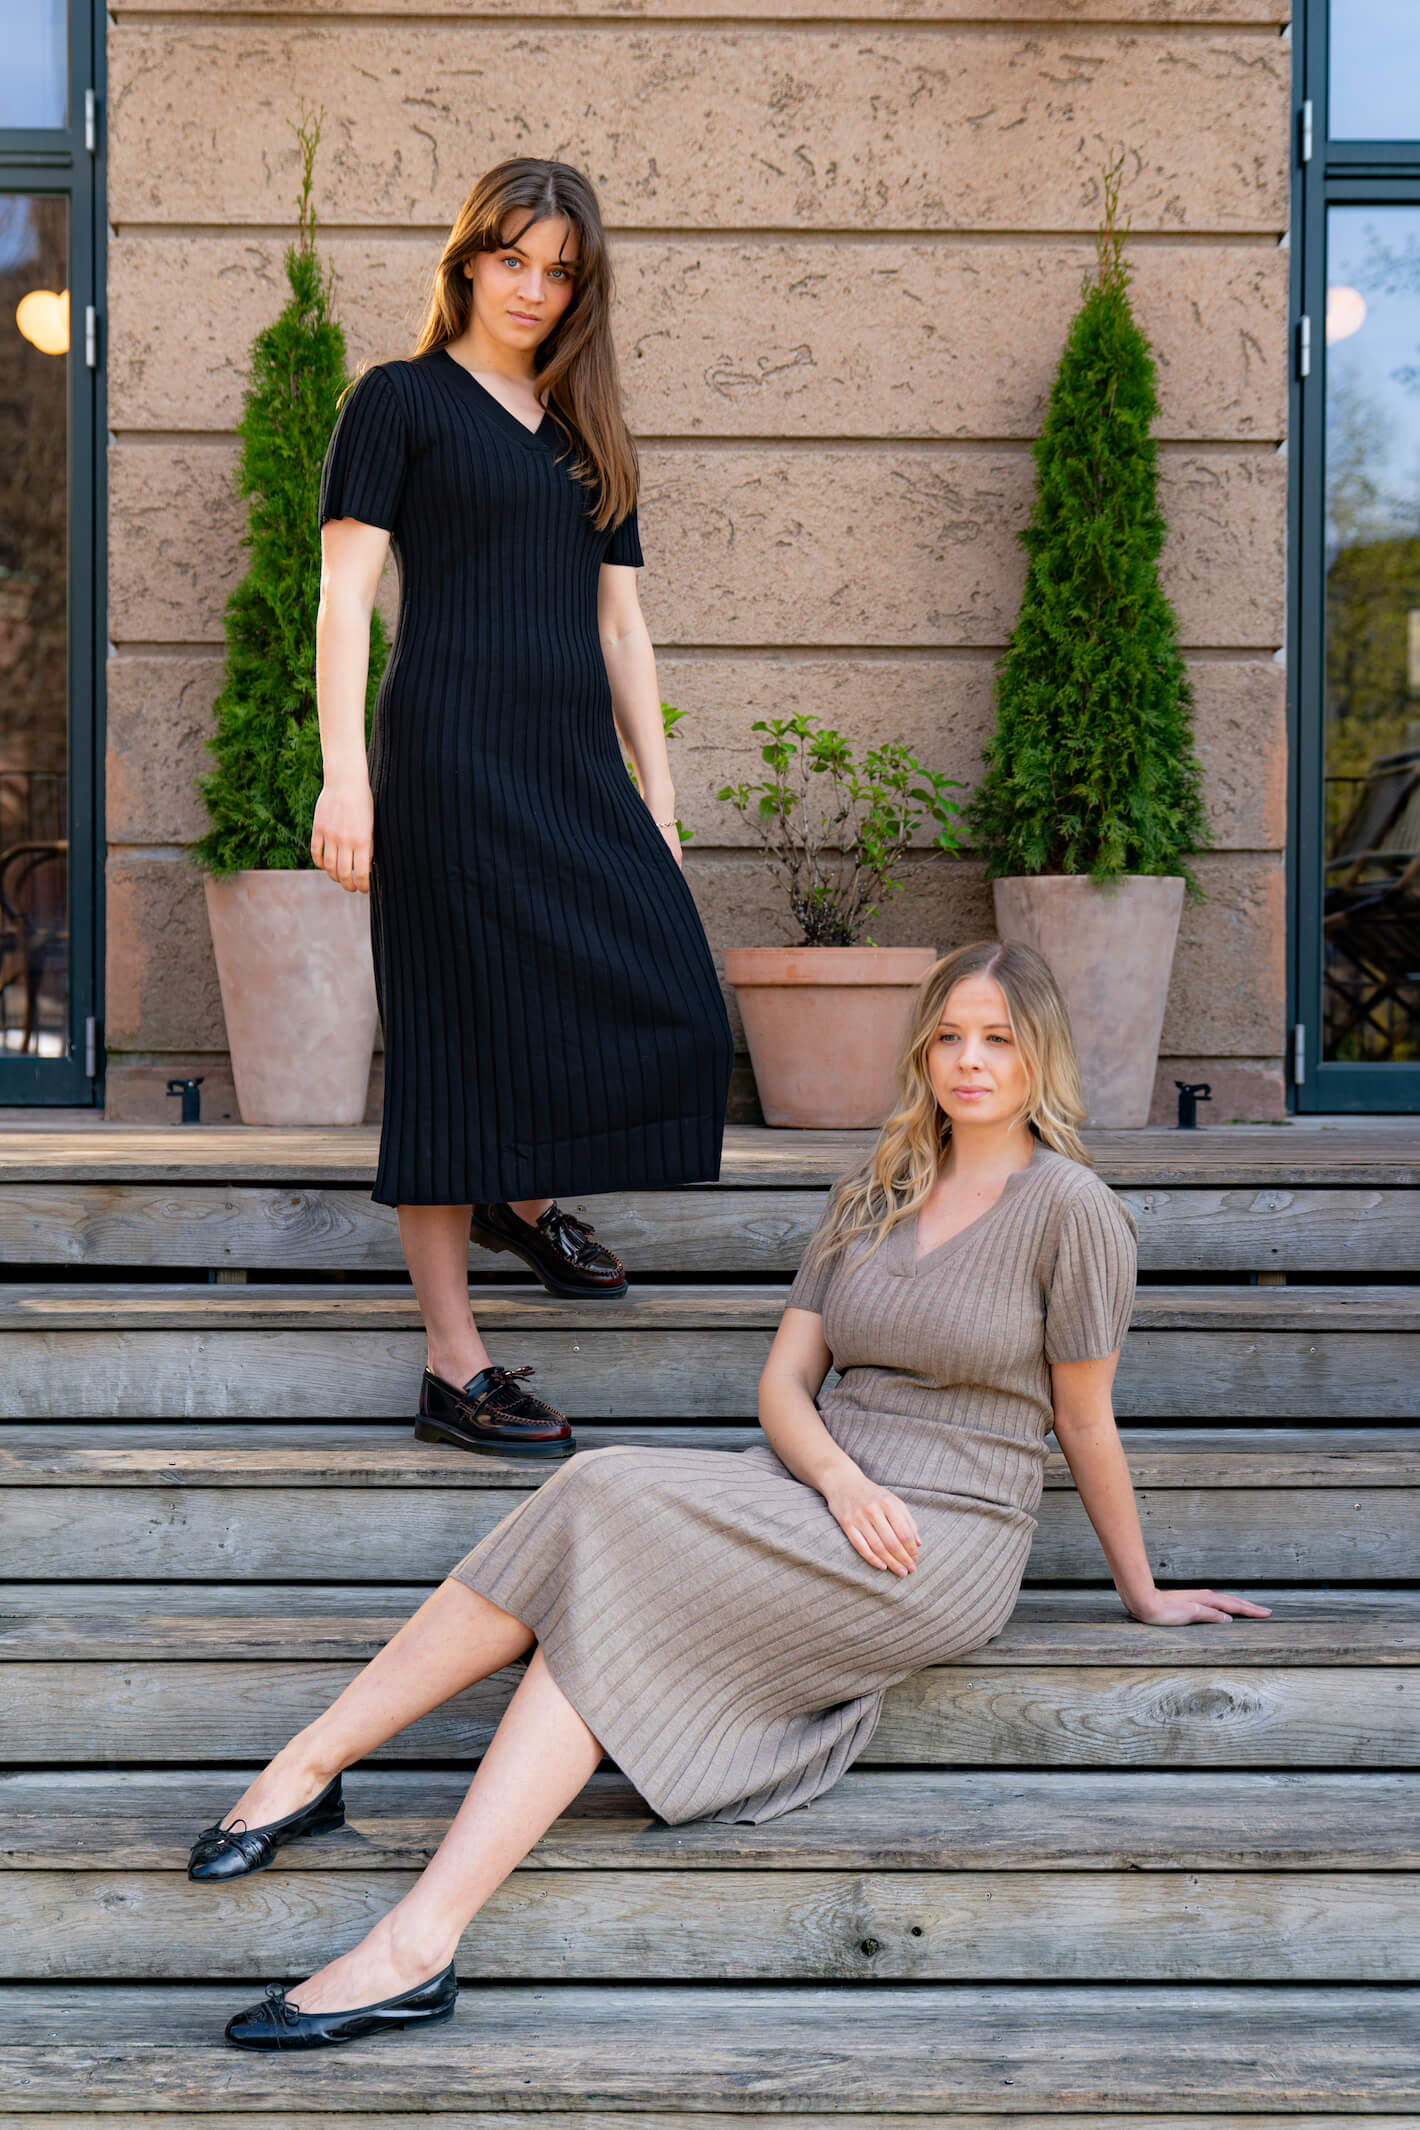 Two women modeling Cyme Copenhagen's spring/summer 2024 collection. One woman stands on wooden steps wearing a black ribbed dress and black loafers. The other woman sits on the steps wearing a beige ribbed dress and black ballet flats. The backdrop features a textured wall with potted green plants, creating a stylish and natural setting.